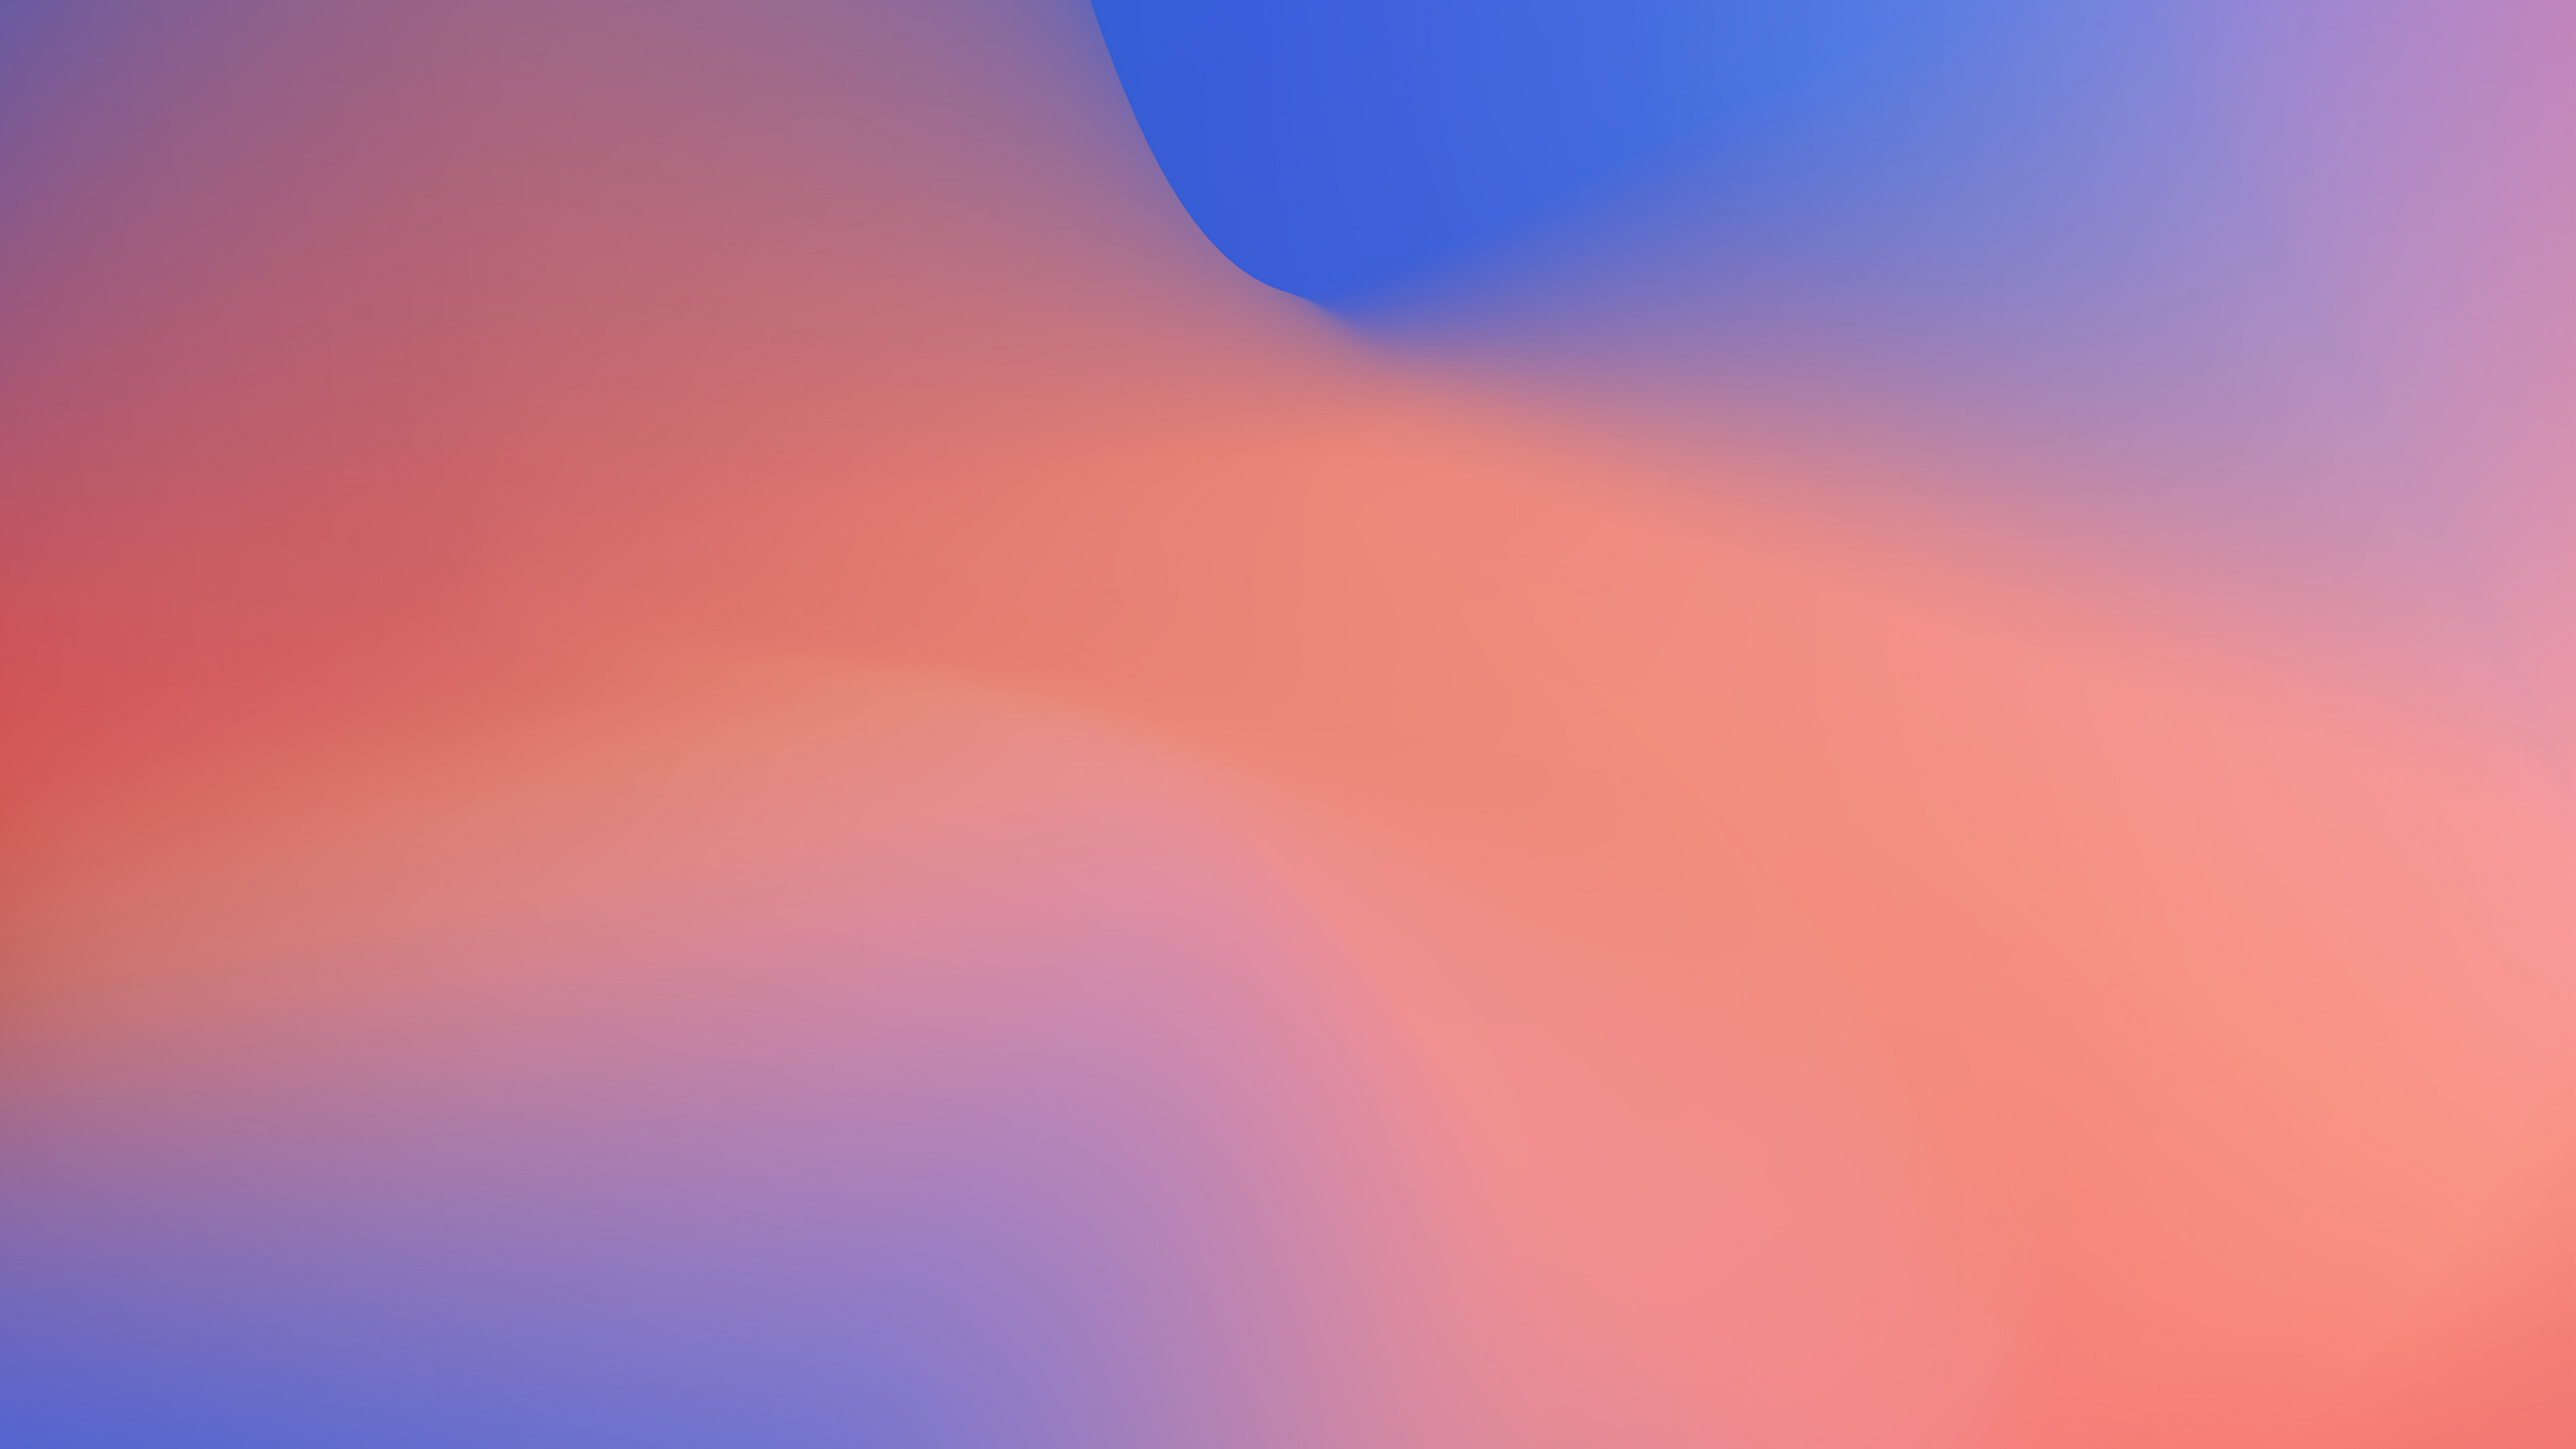 Wallpaper Google Pixel 3 Android 9 Pie Abstract 4k Os 6